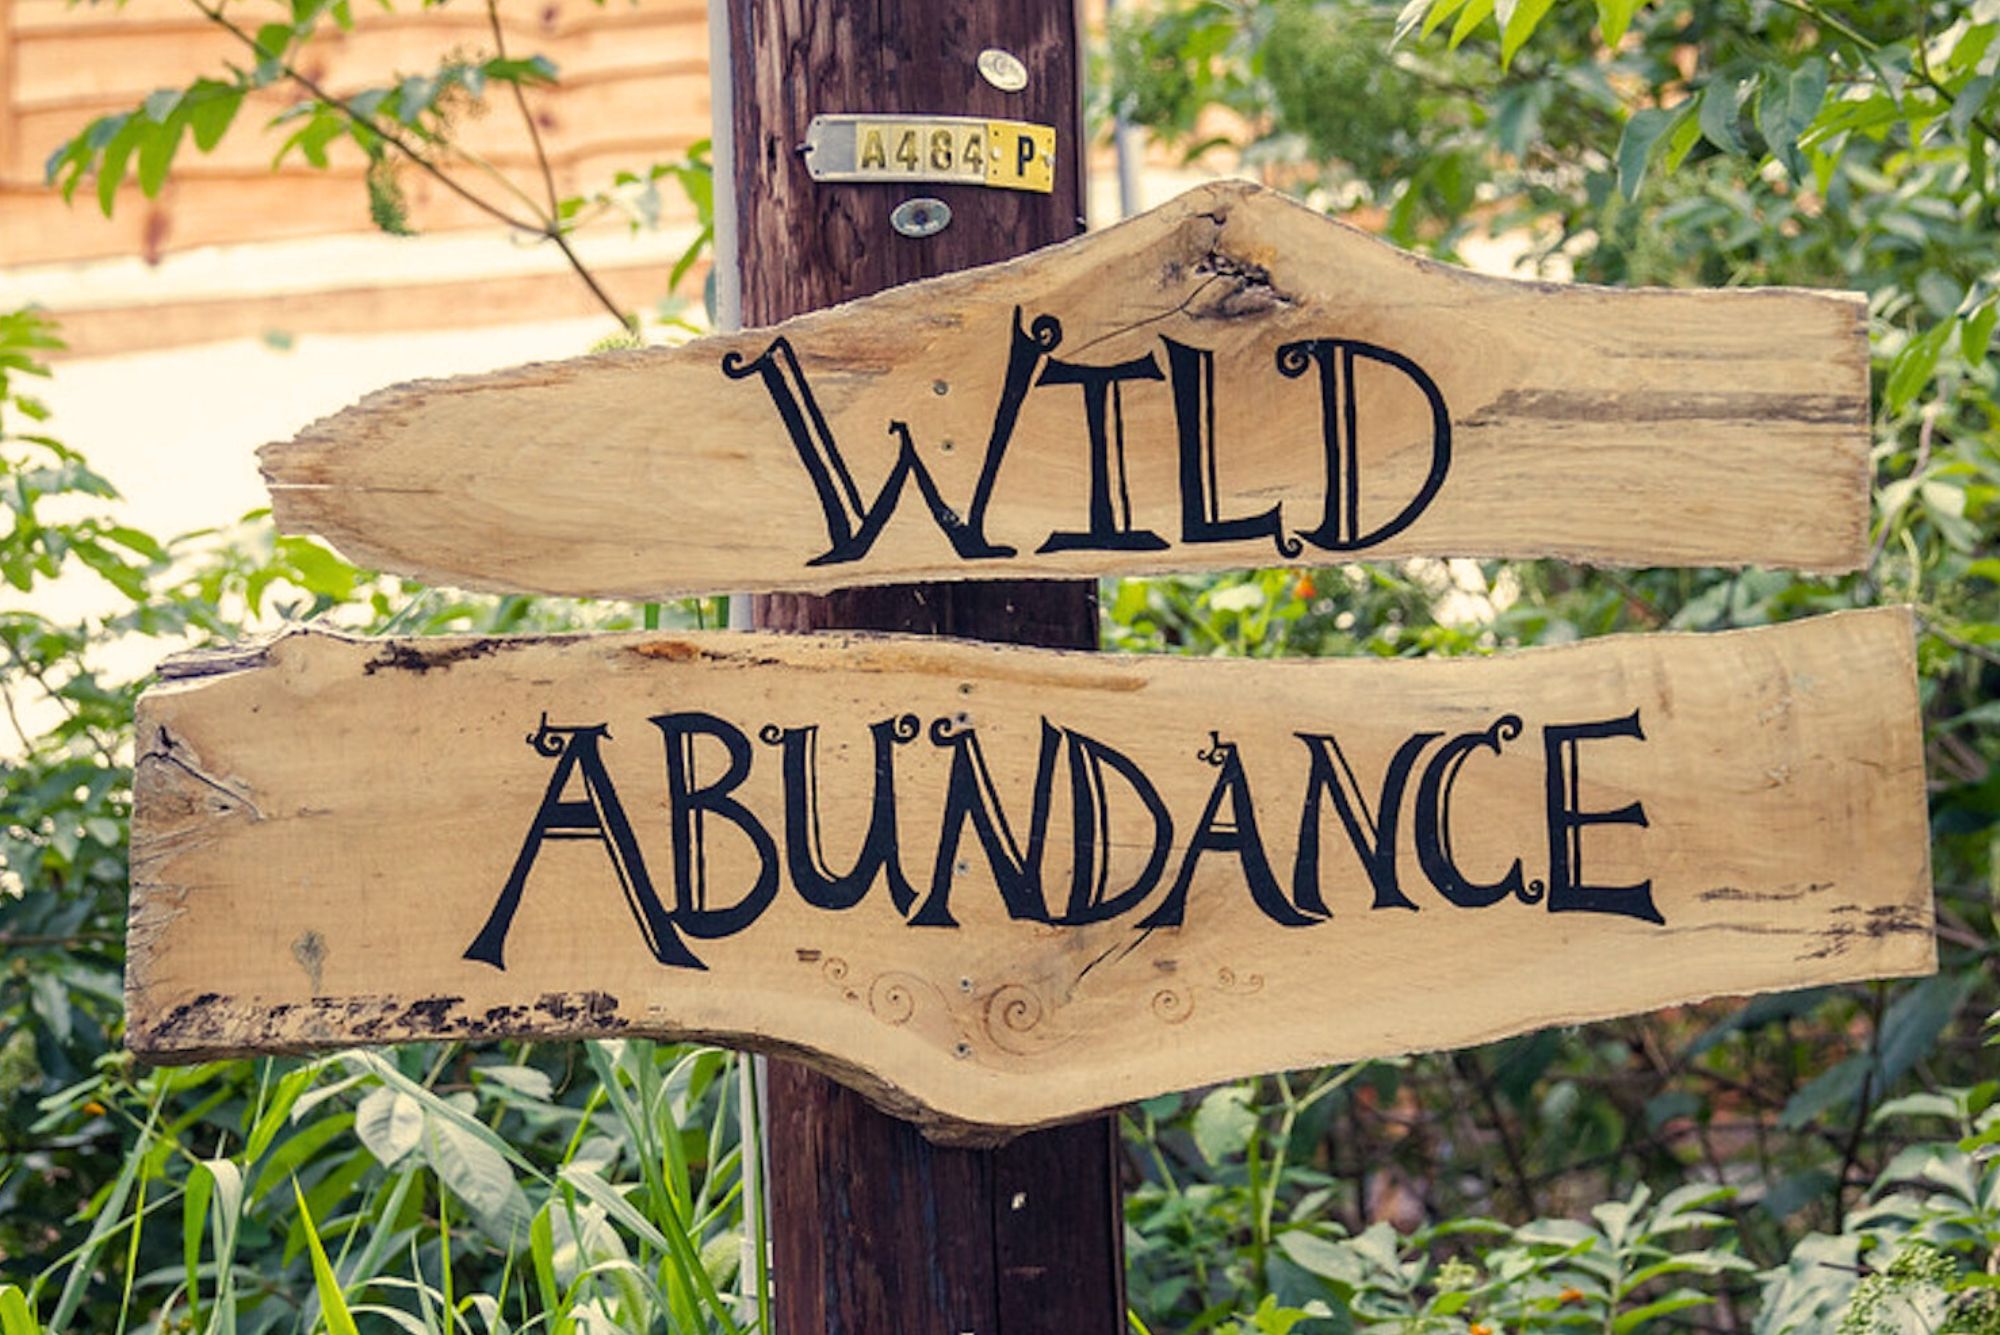 Signage for Wild Abundance marks the entrance to the campus upon your arrival